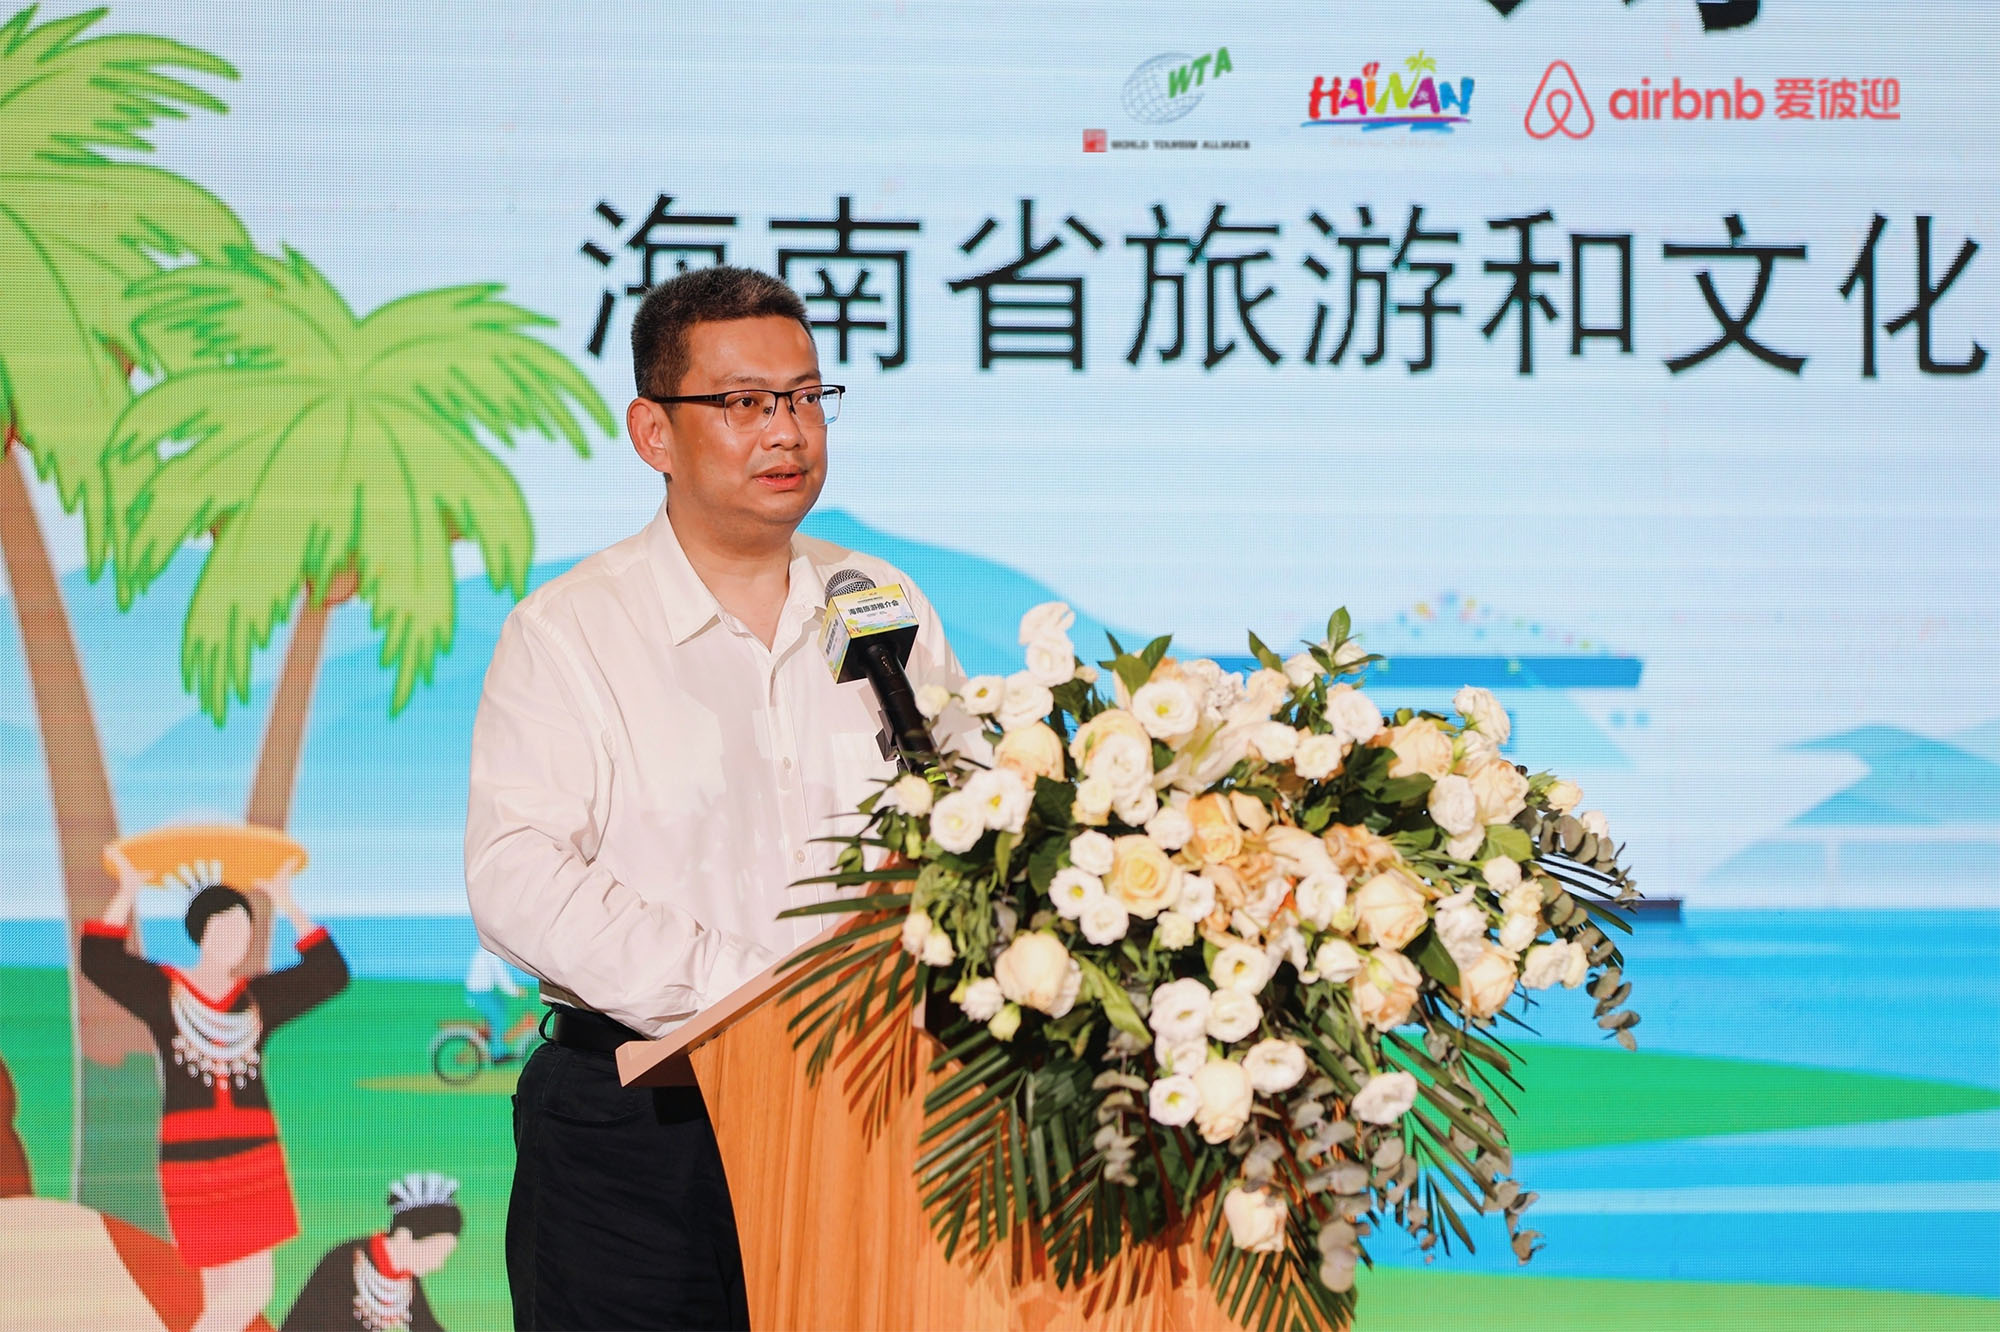 LIU Cheng, Deputy Director of the Department of Tourism, Culture, Radio, Television and Sports of Hainan Province